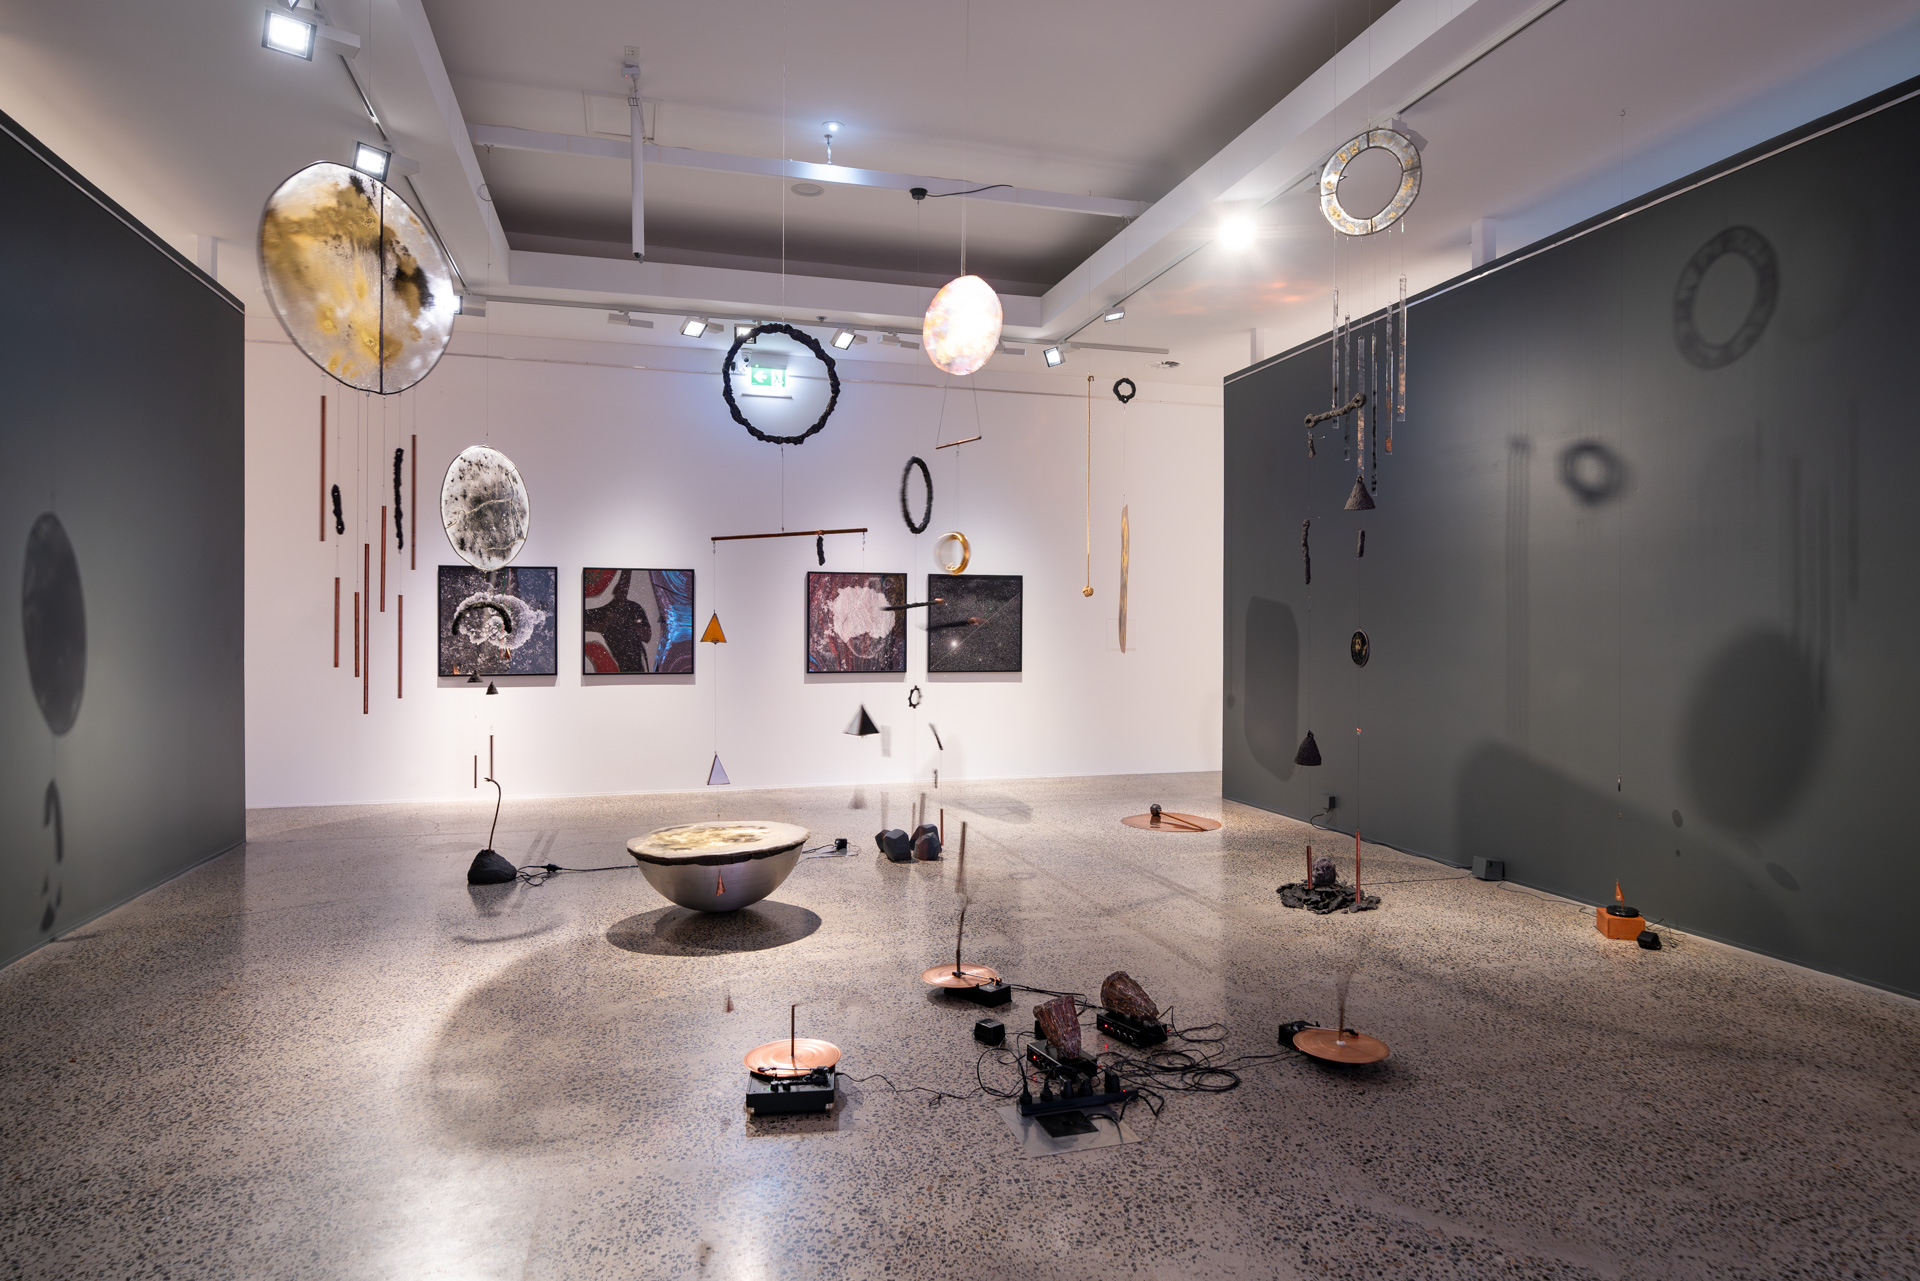 Installation view of <em>West of Central</em>, Bathurst Regional Art Gallery, 1 July–27 August 2023, featuring Vicky Browne, <em>Cosmic Noise</em>, 2018–ongoing, mixed media installation, dimensions variable. Courtesy the artist., Haines &amp; Hinterding, <em>Lichen and Stars 2 (Faulconbridge /NGC4755 Jewel Box Star Cluster),</em> 2021, pigment print on Ilford Gold Fibre Pearl 290gsm, 2 units each 93 x 93 cm (framed), and Haines &amp; Hinterding, <em>Lichen and Stars 4 (Kings Tableland / M8 Lagoon Nebula)</em>, 2021, pigment print on Ilford Gold Fibre Pearl 290gsm, 2 units each 93 x 93 cm (framed). Photo: David Roma Photography